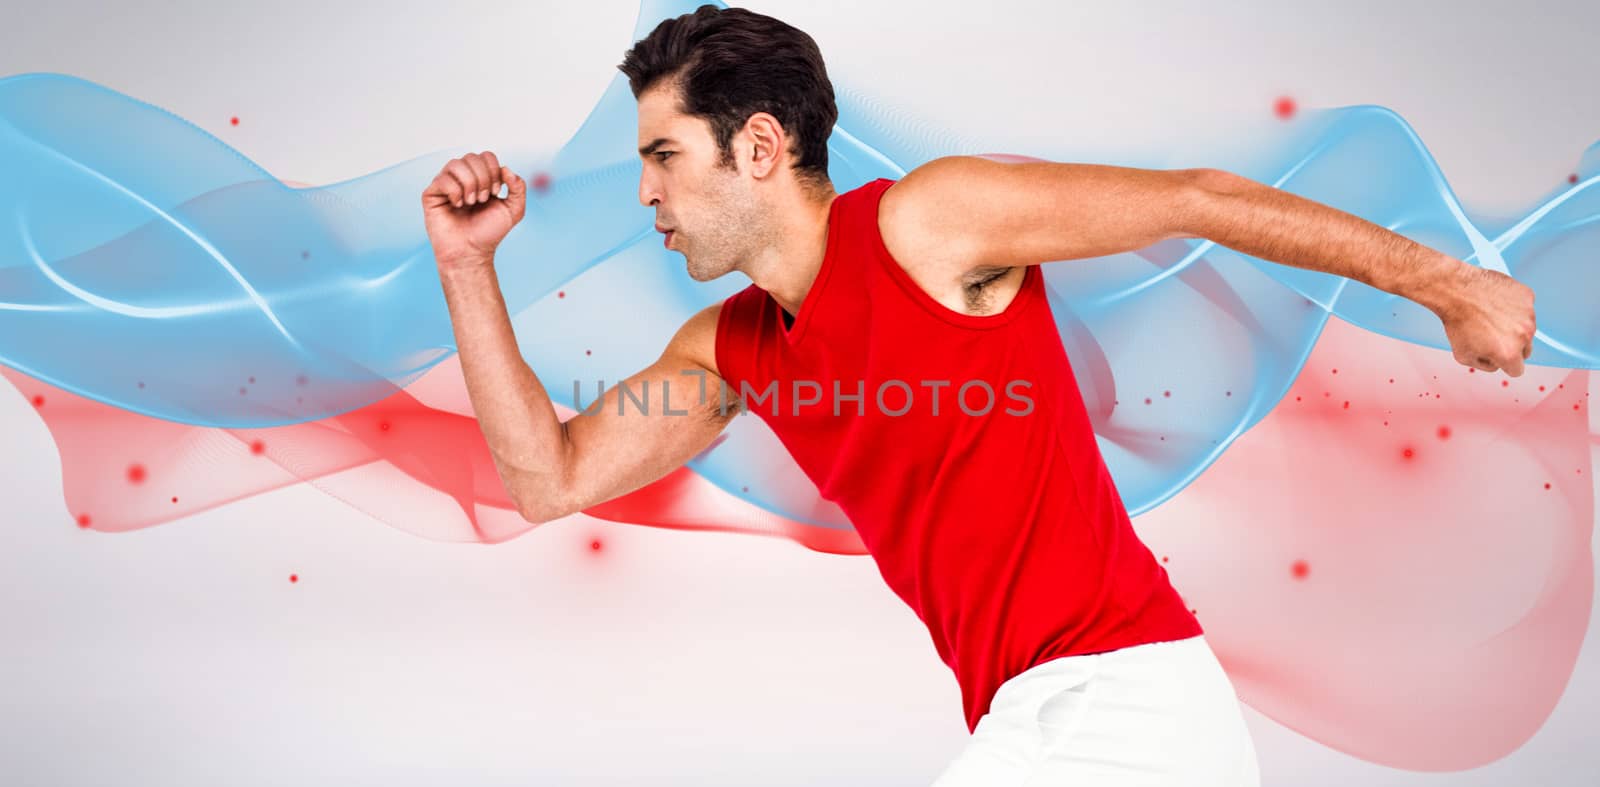 Male athlete running on white background against blue wave